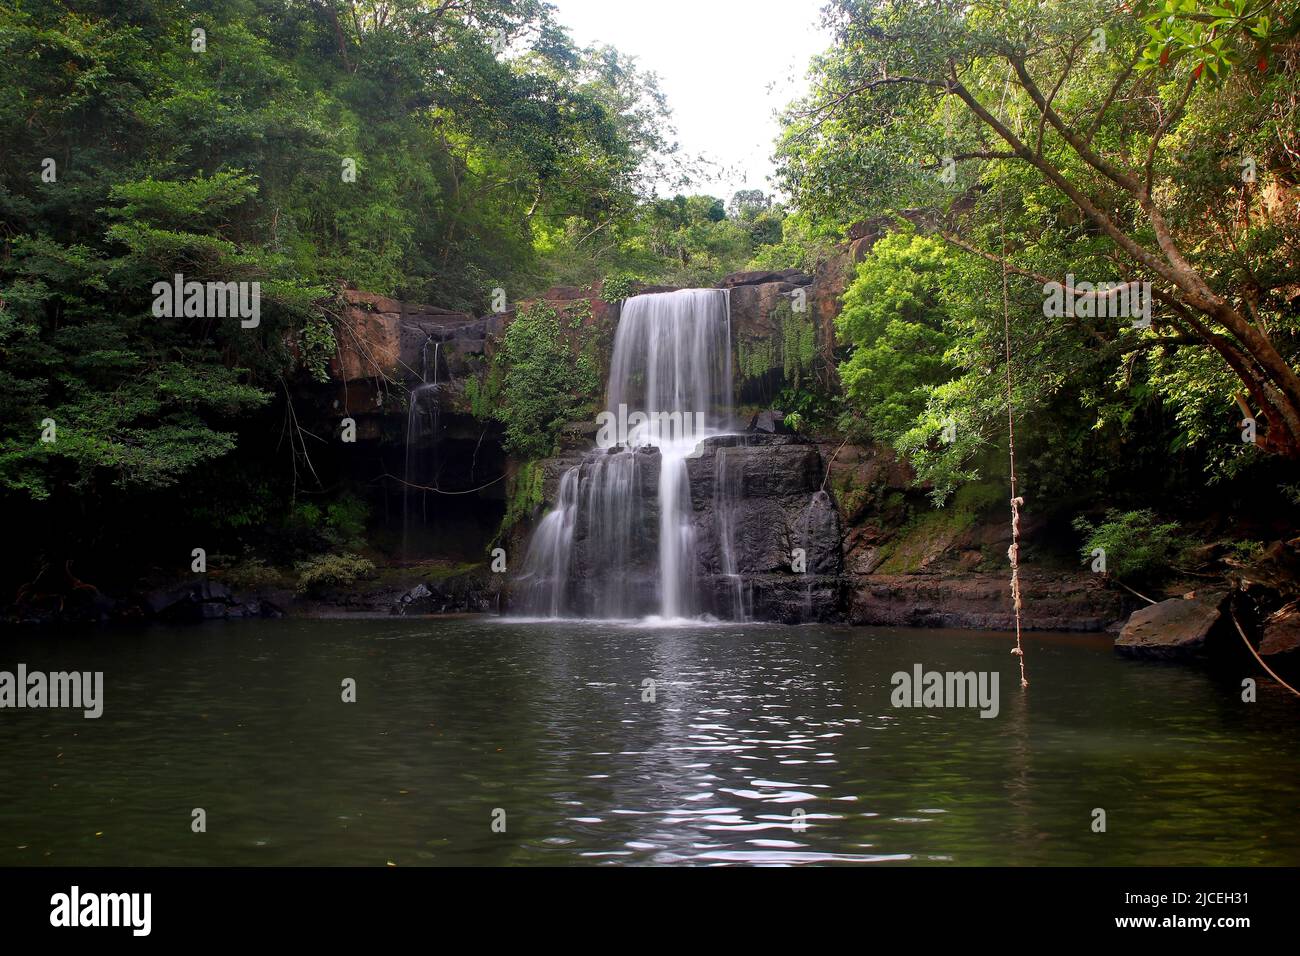 landscape photo, amazing waterfall in green forest Stock Photo